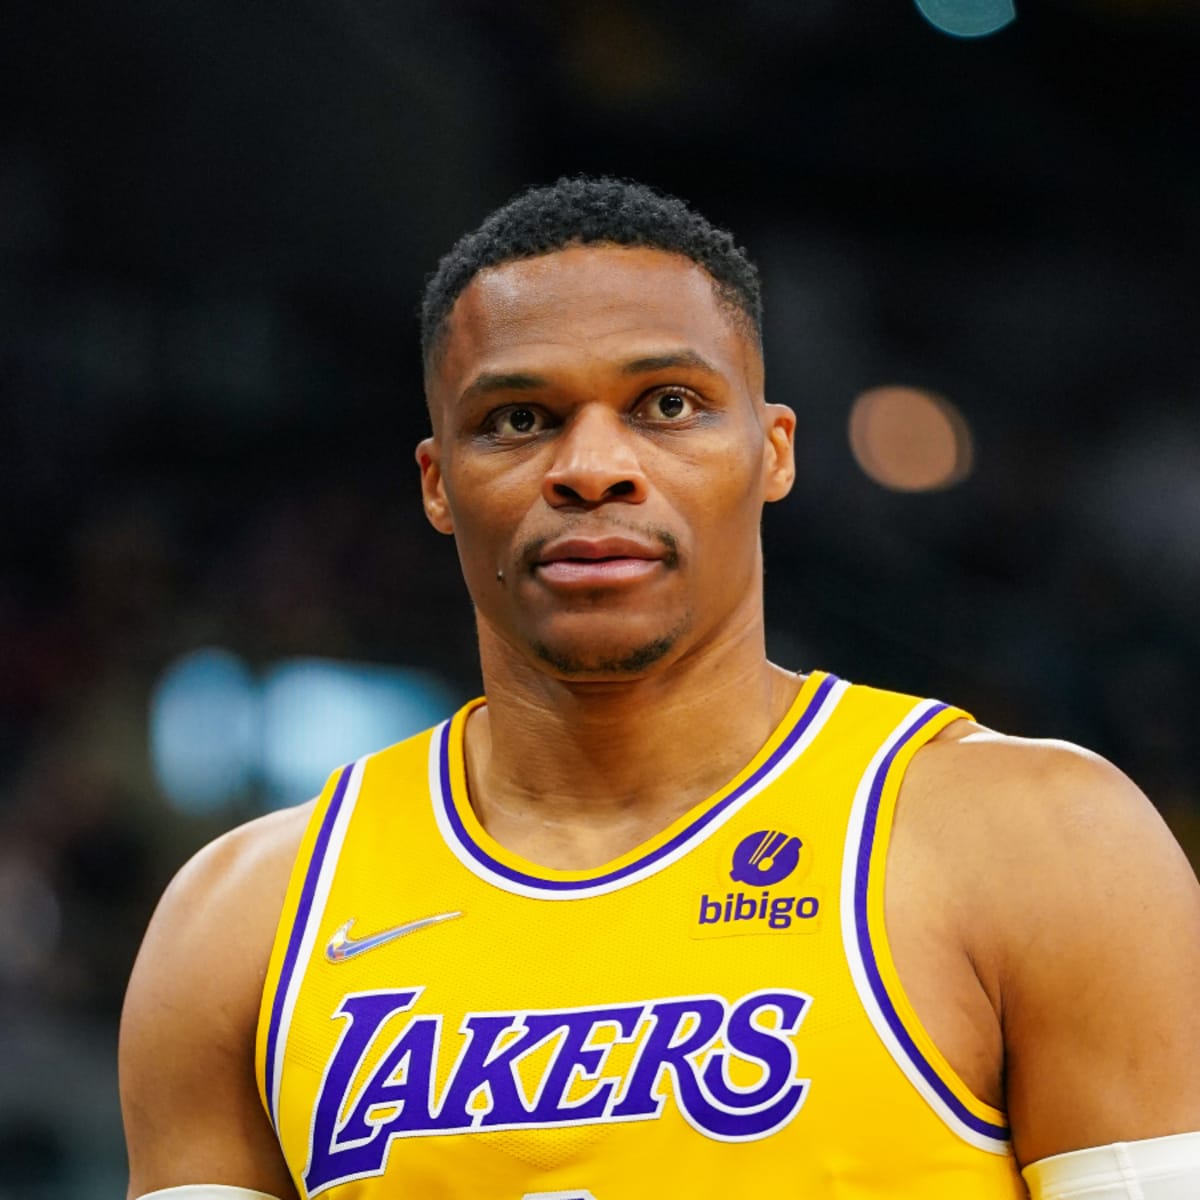 New Laker Russell Westbrook Says Kobe Bryant 'Hasn't Left His Head